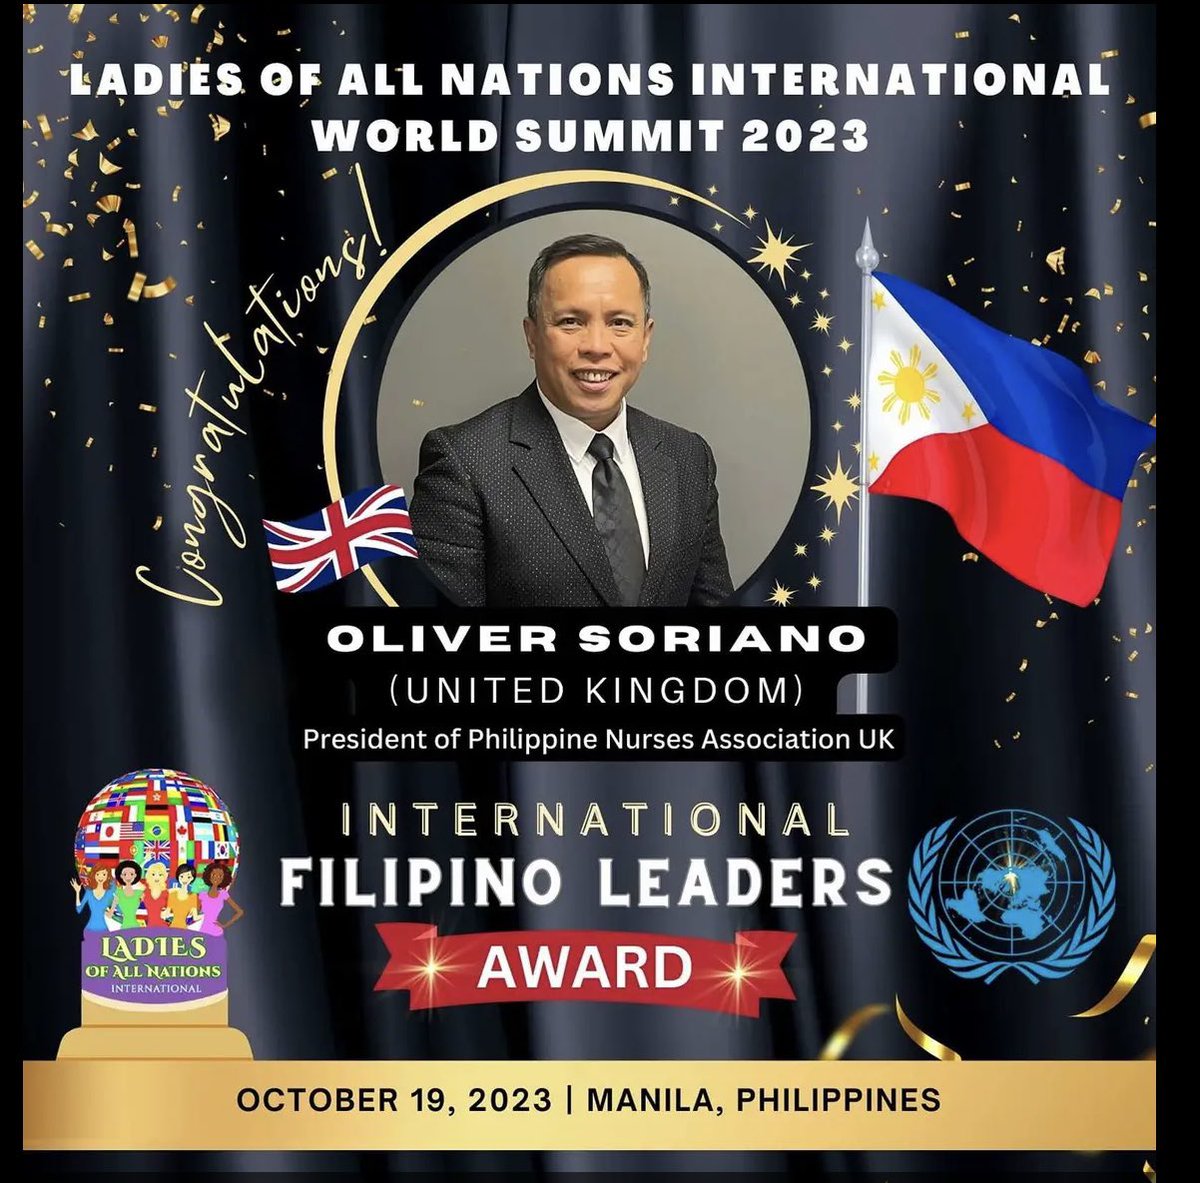 Thank you #LadiesOfAllNationsInternational for giving me this award. Sharing this recognition to my @PNA_UKnurses and the fantastic #NursingLeaders who have supported me/us. Unfortunately will not be in the 🇵🇭 to accept the award 🙏🏽🙏🏽🙏🏽 @dence10 @CielitoCaneja @jcarriolaRN